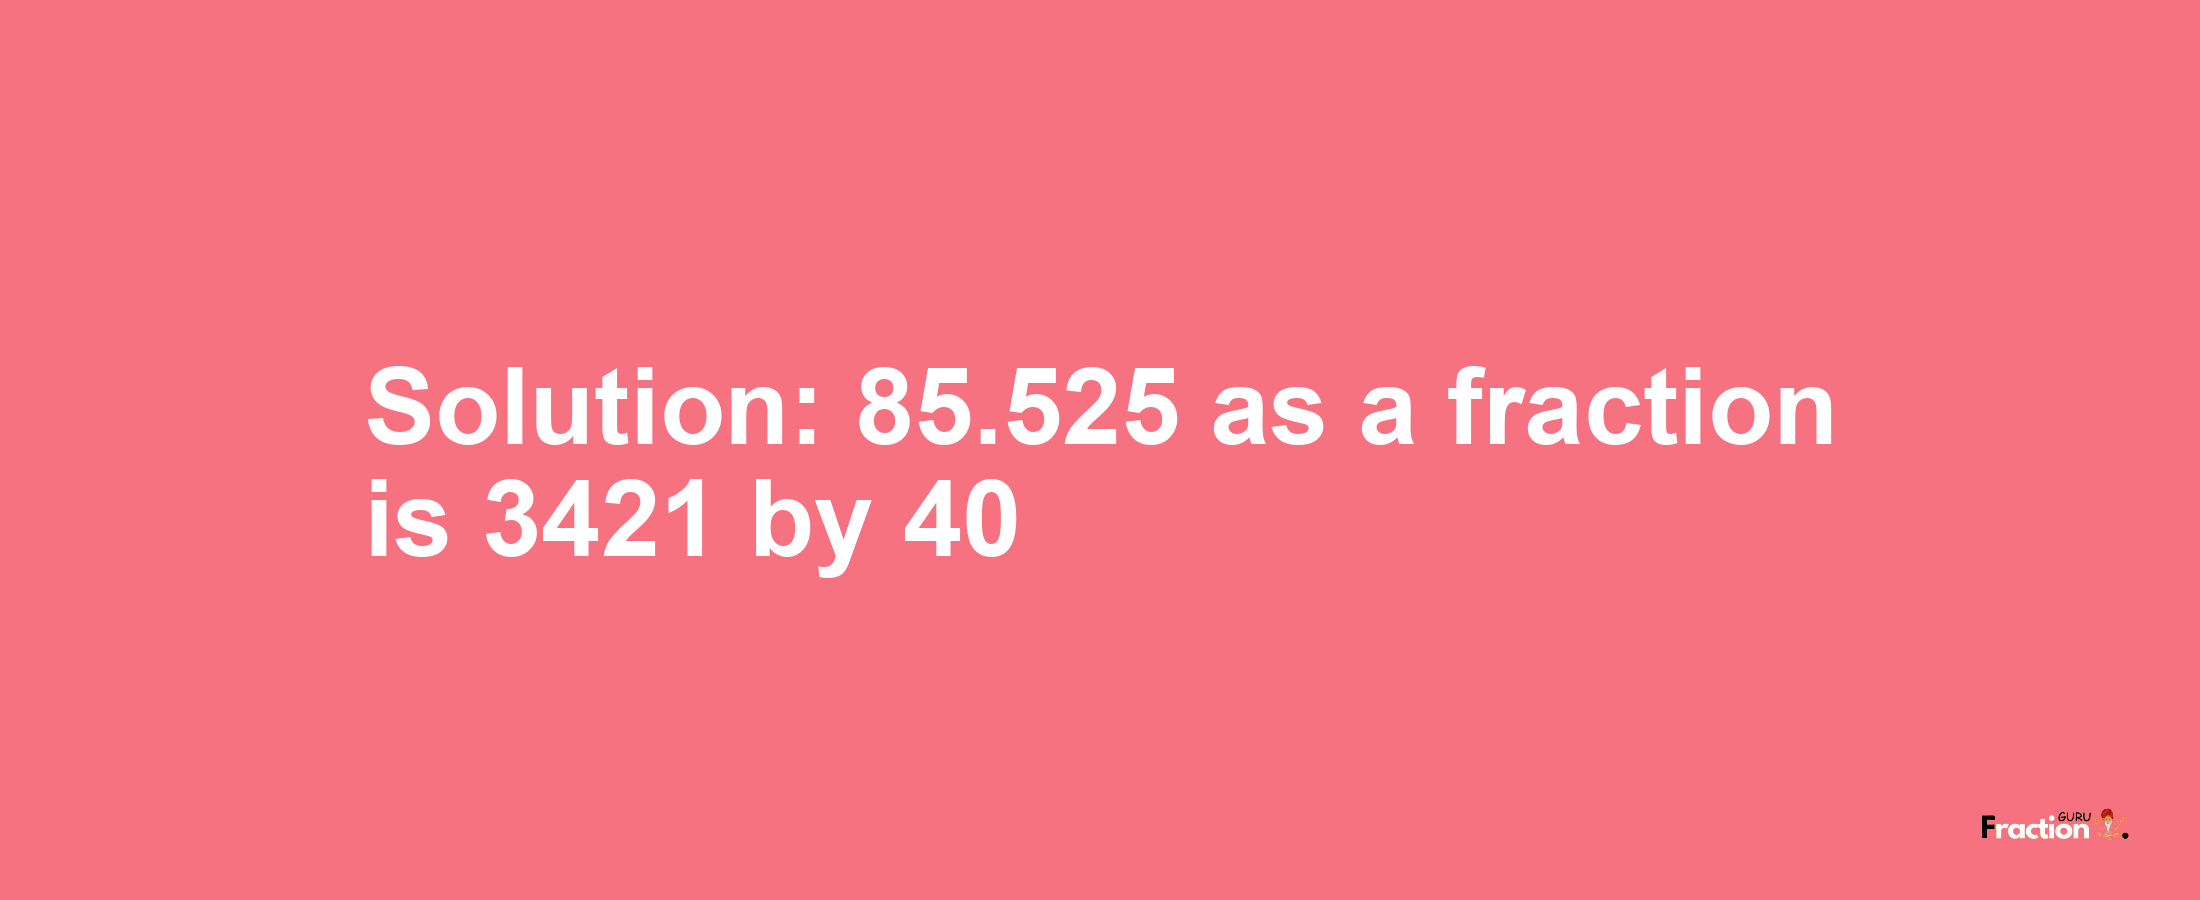 Solution:85.525 as a fraction is 3421/40